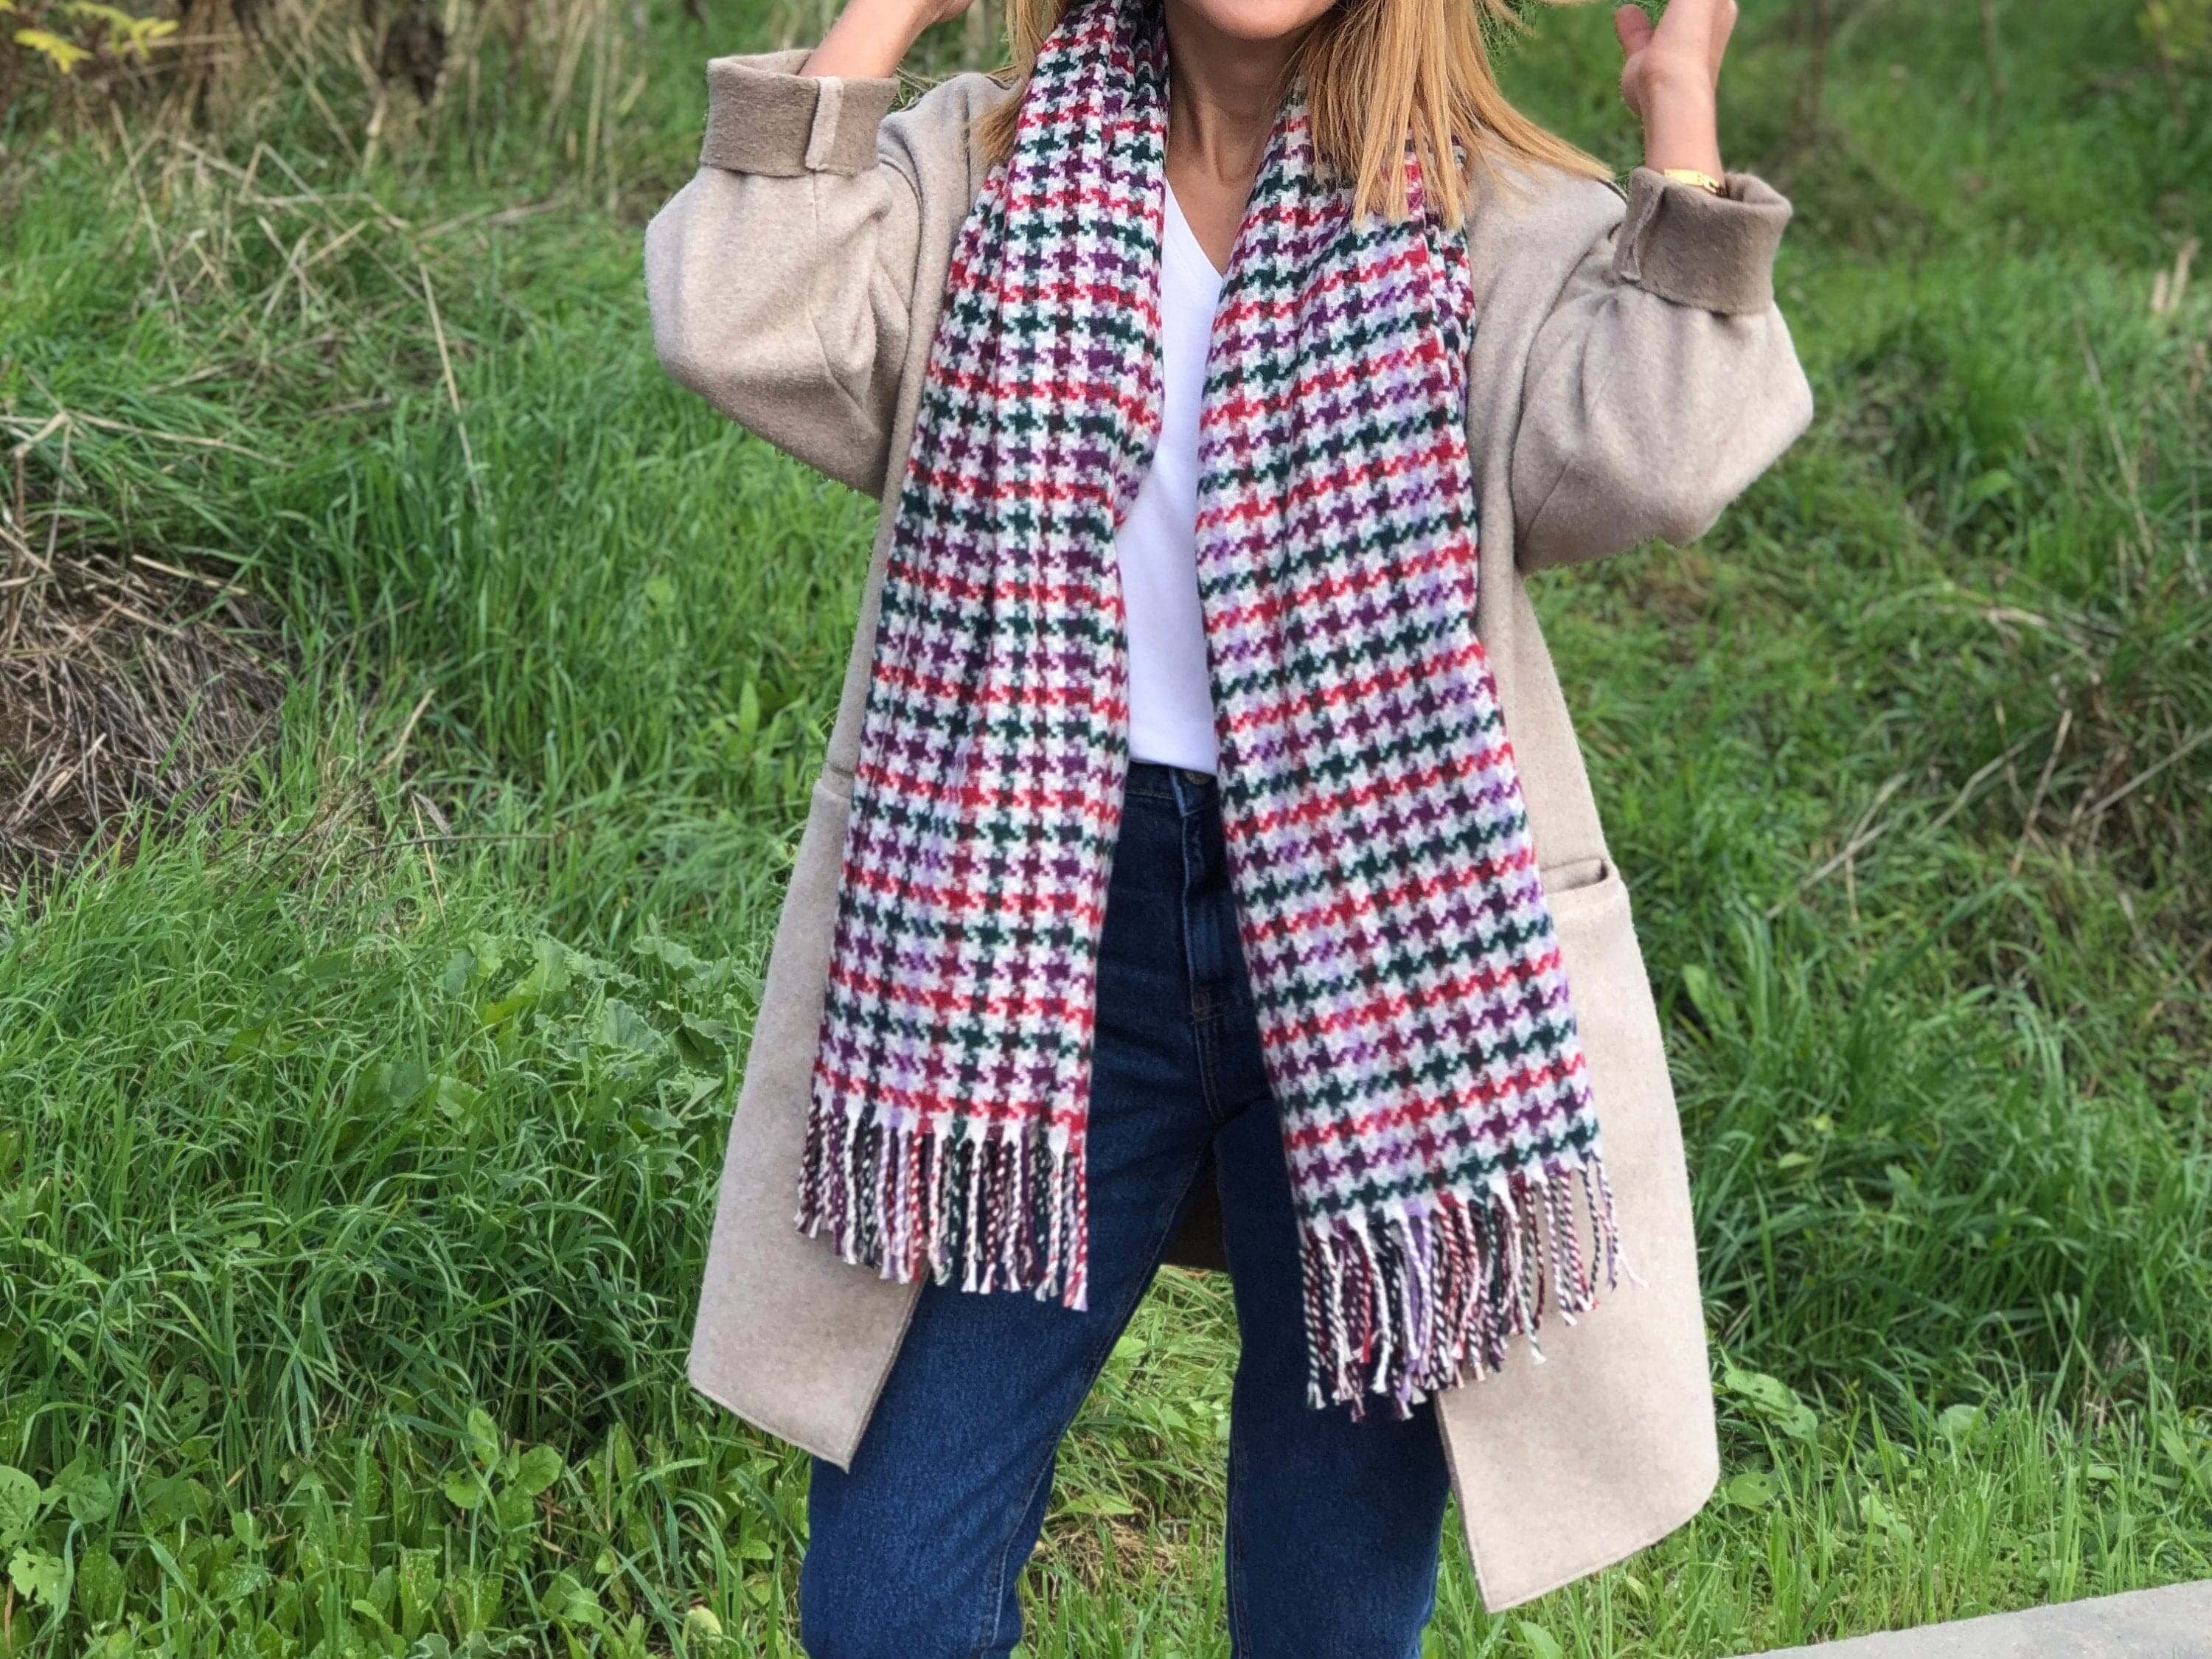 Wrap yourself in luxury with this wool pattern blanket scarf